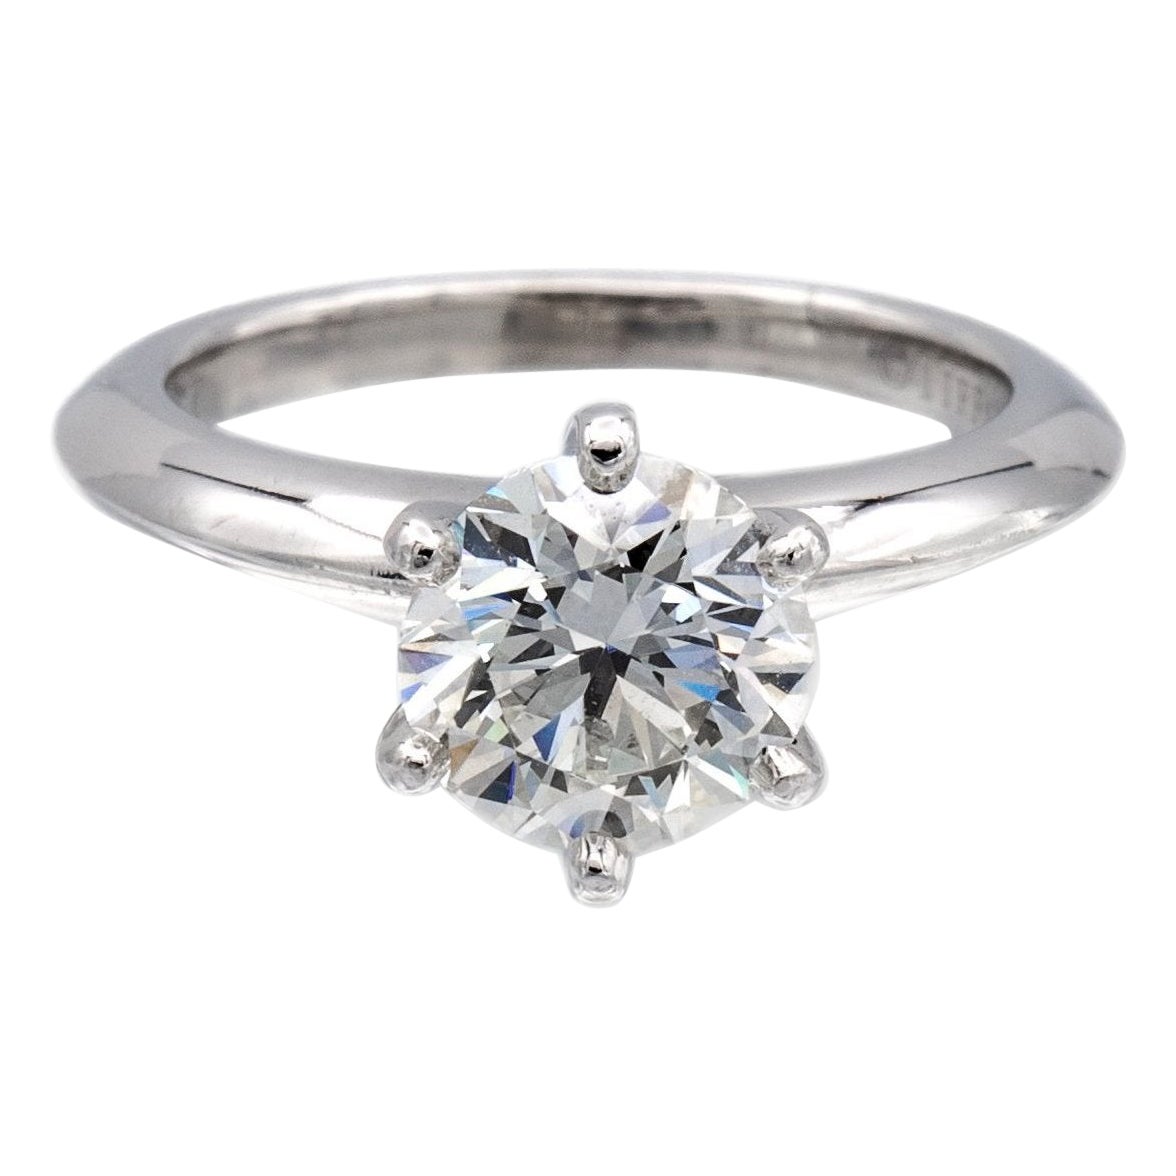 Tiffany and Co. Platinum Solitaire Round Diamond Engagement Ring 1.04ct IVS1